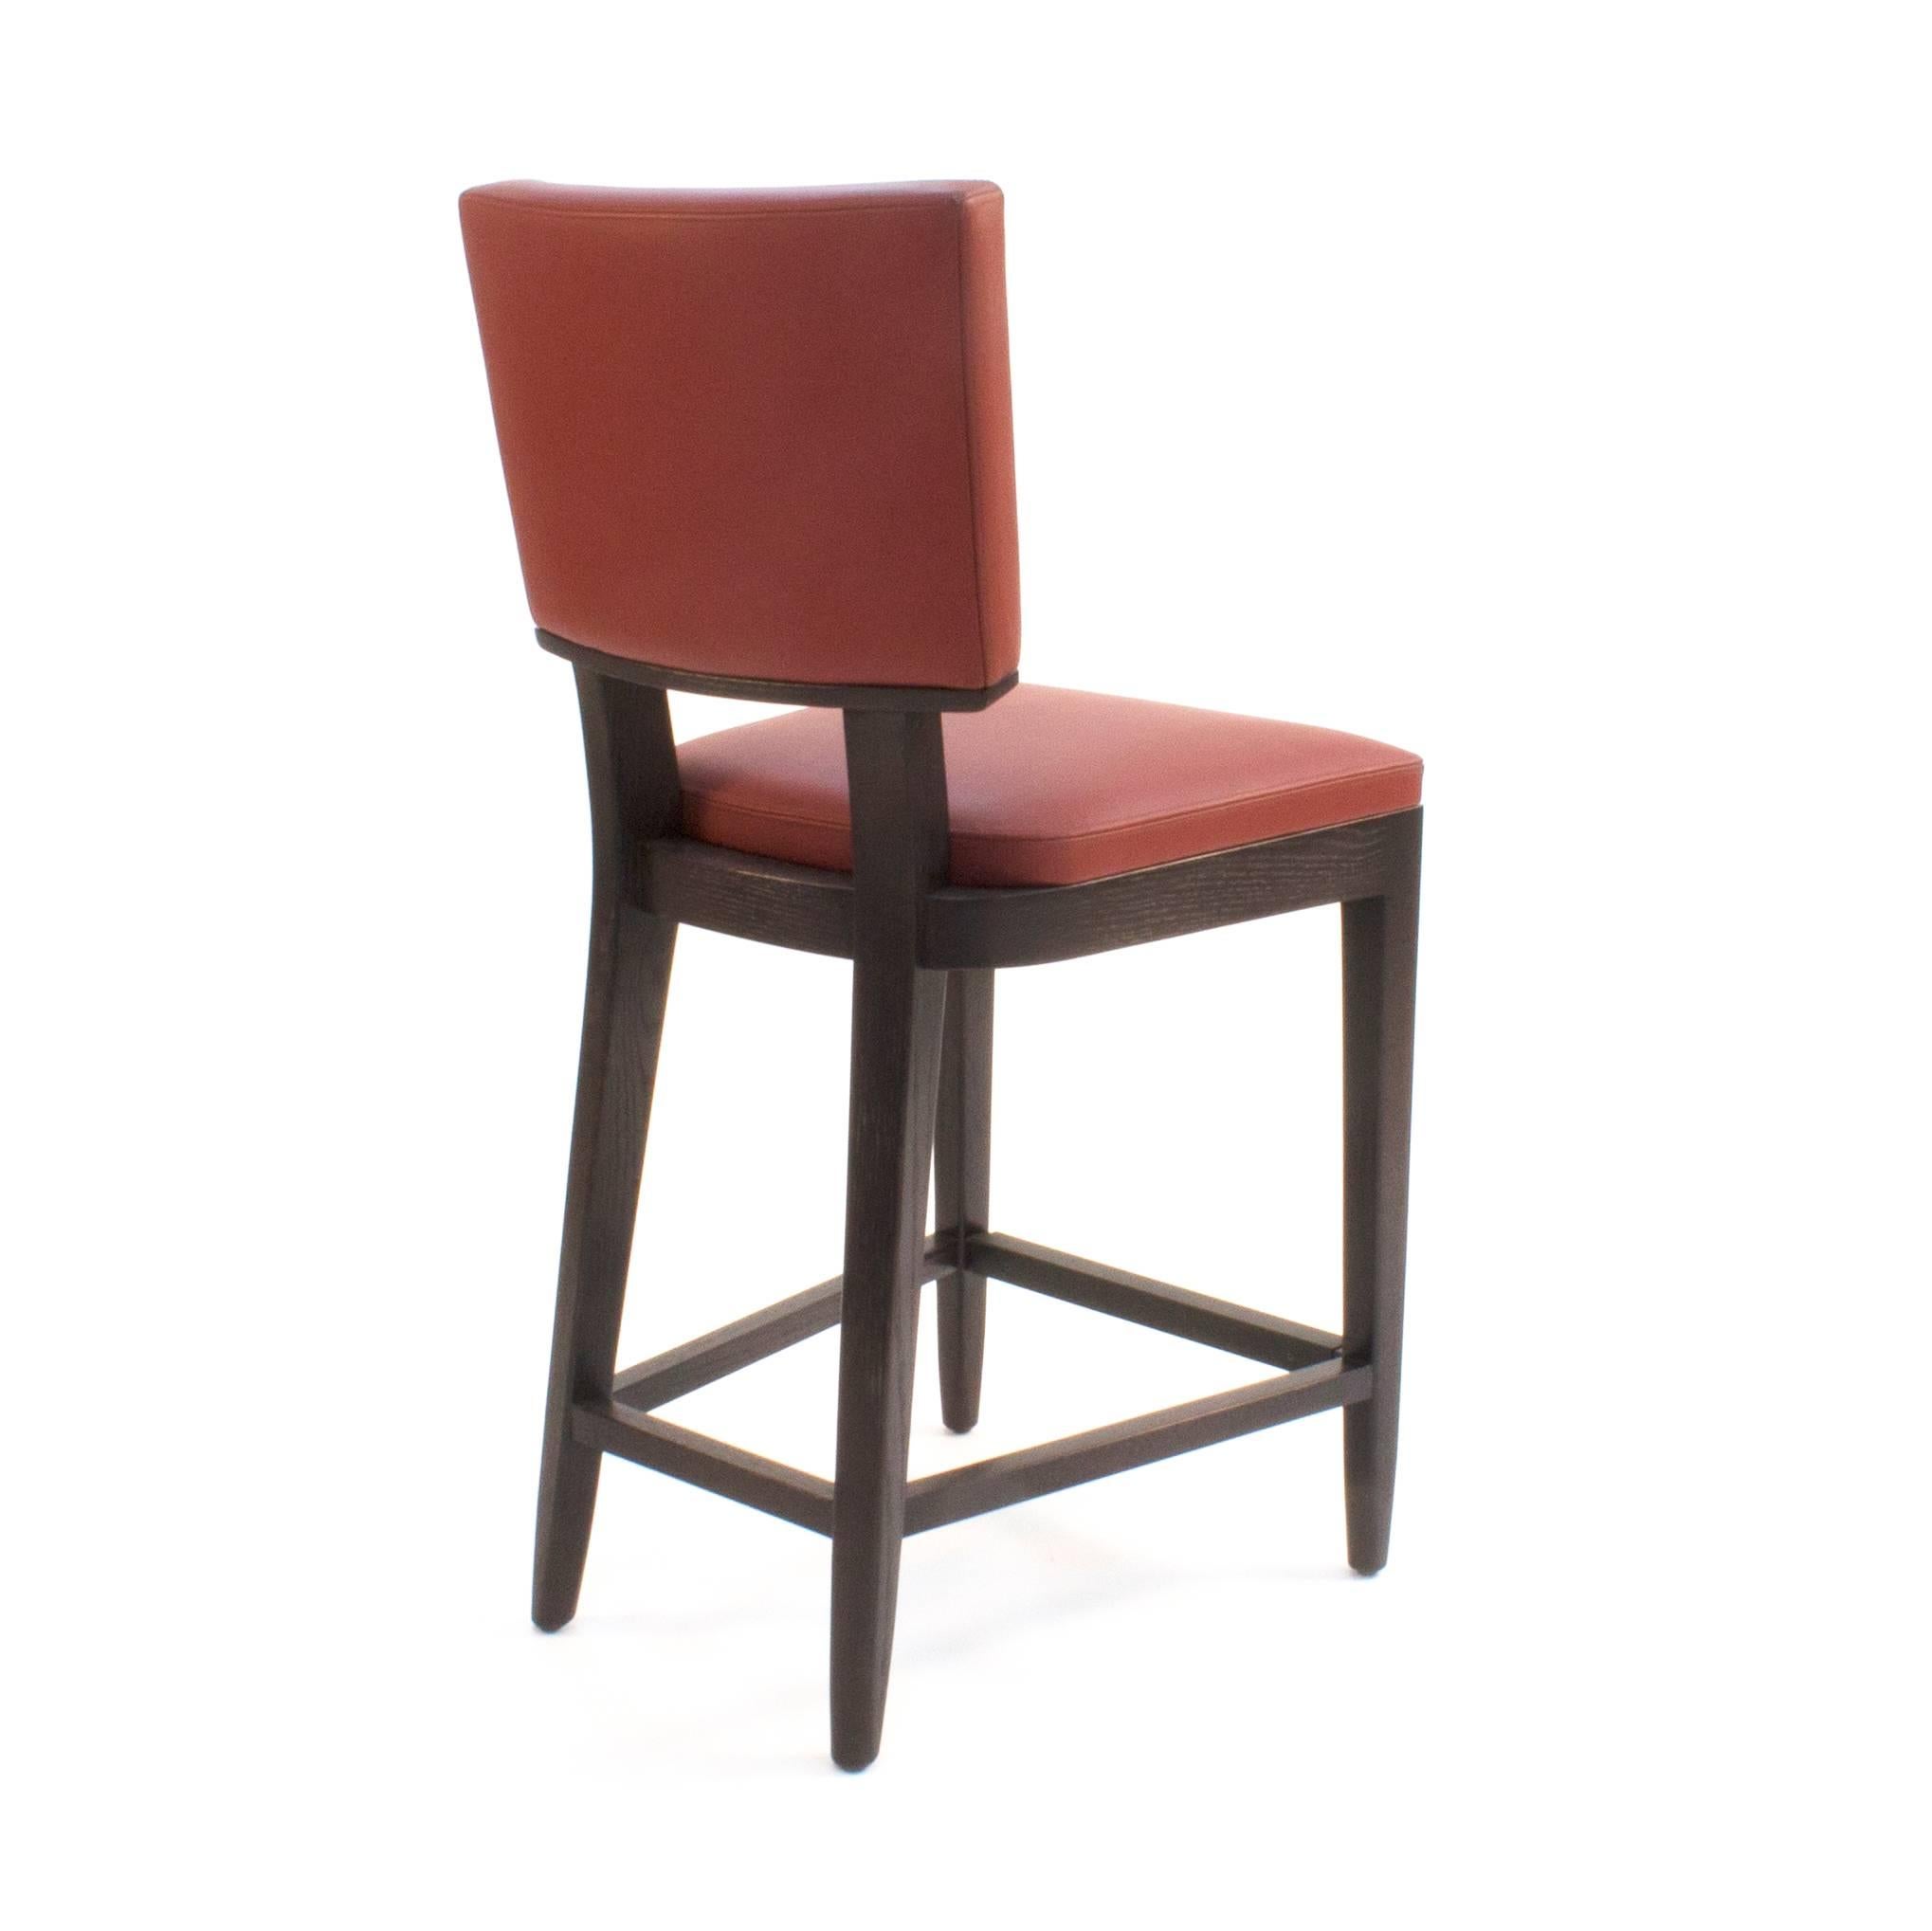 Upholstered stool with floating, curved back and exposed wood frame upholstered in CL Leather.